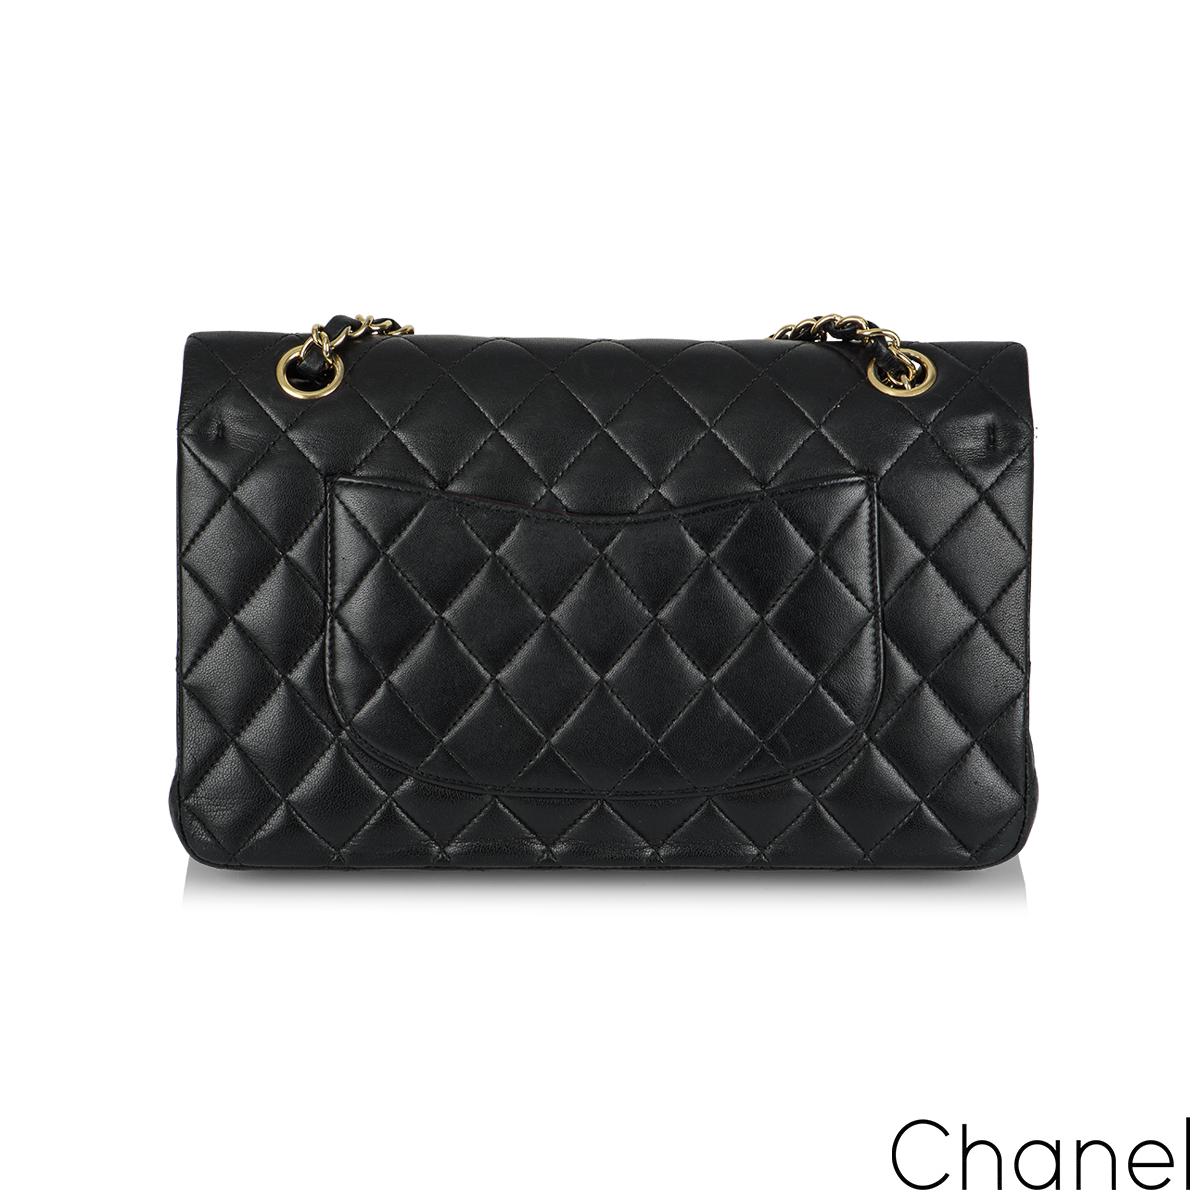 A Timeless Chanel Classic Double Flap Handbag. The exterior of this medium classic is in black lambskin leather with gold tone hardware. It features a front flap with signature CC turnlock closure, half moon back pocket, and adjustable interwoven